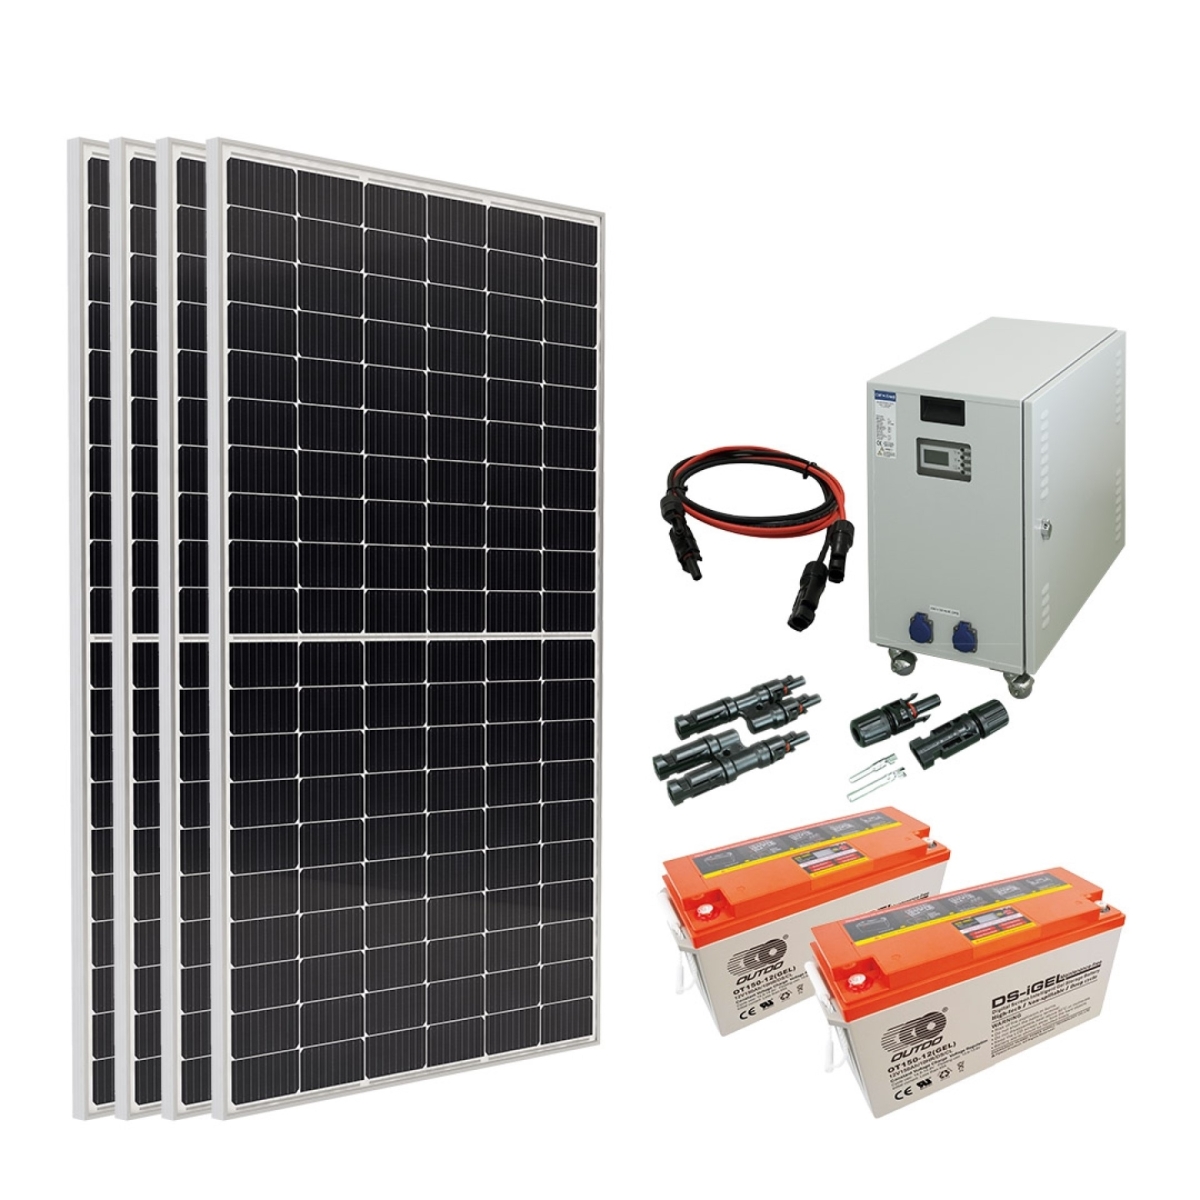 4 Panel 3000W/24V Off-Grid Set with Power Box